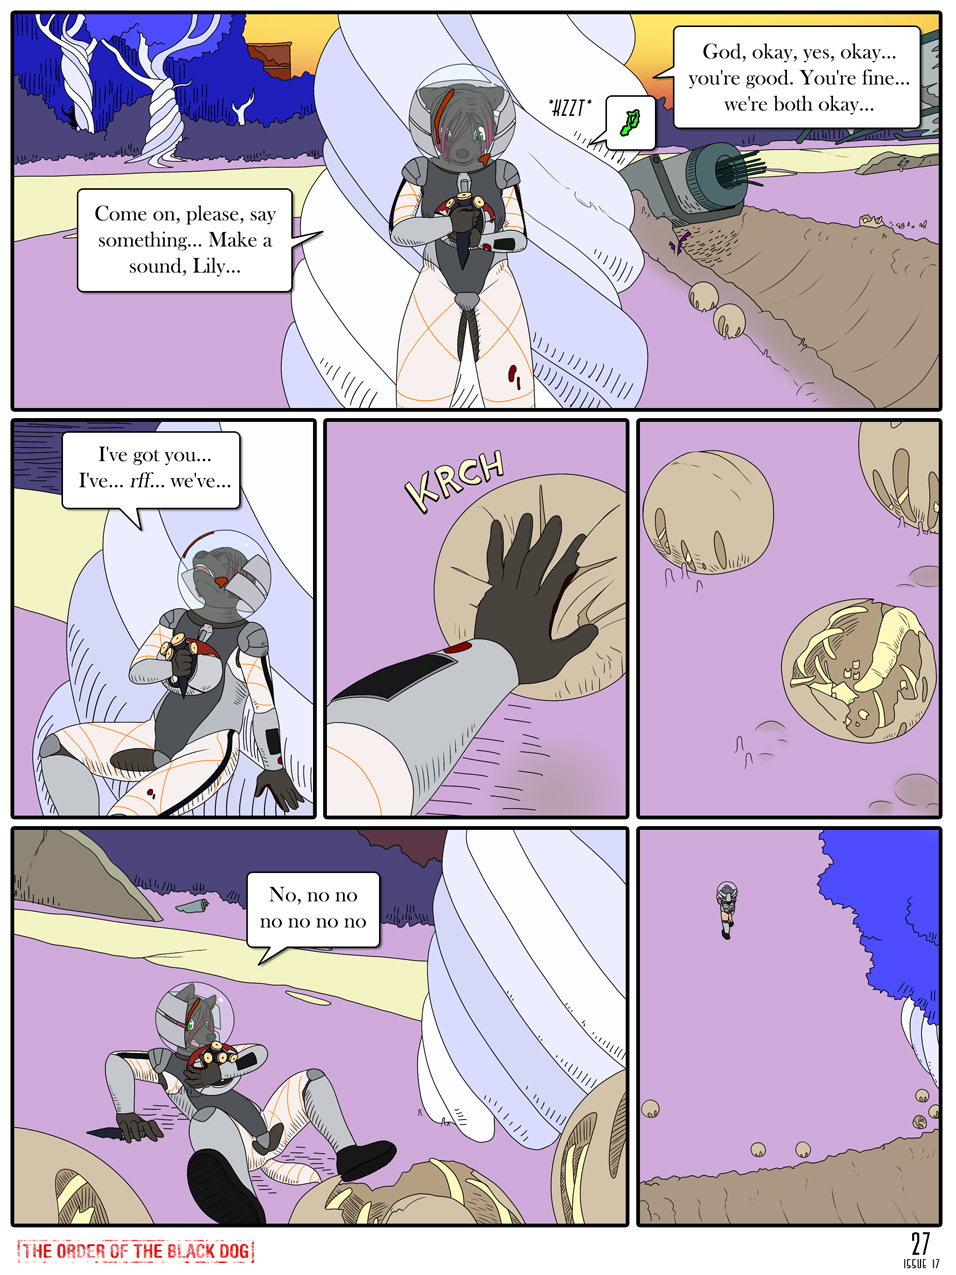 Issue 17, Page 27